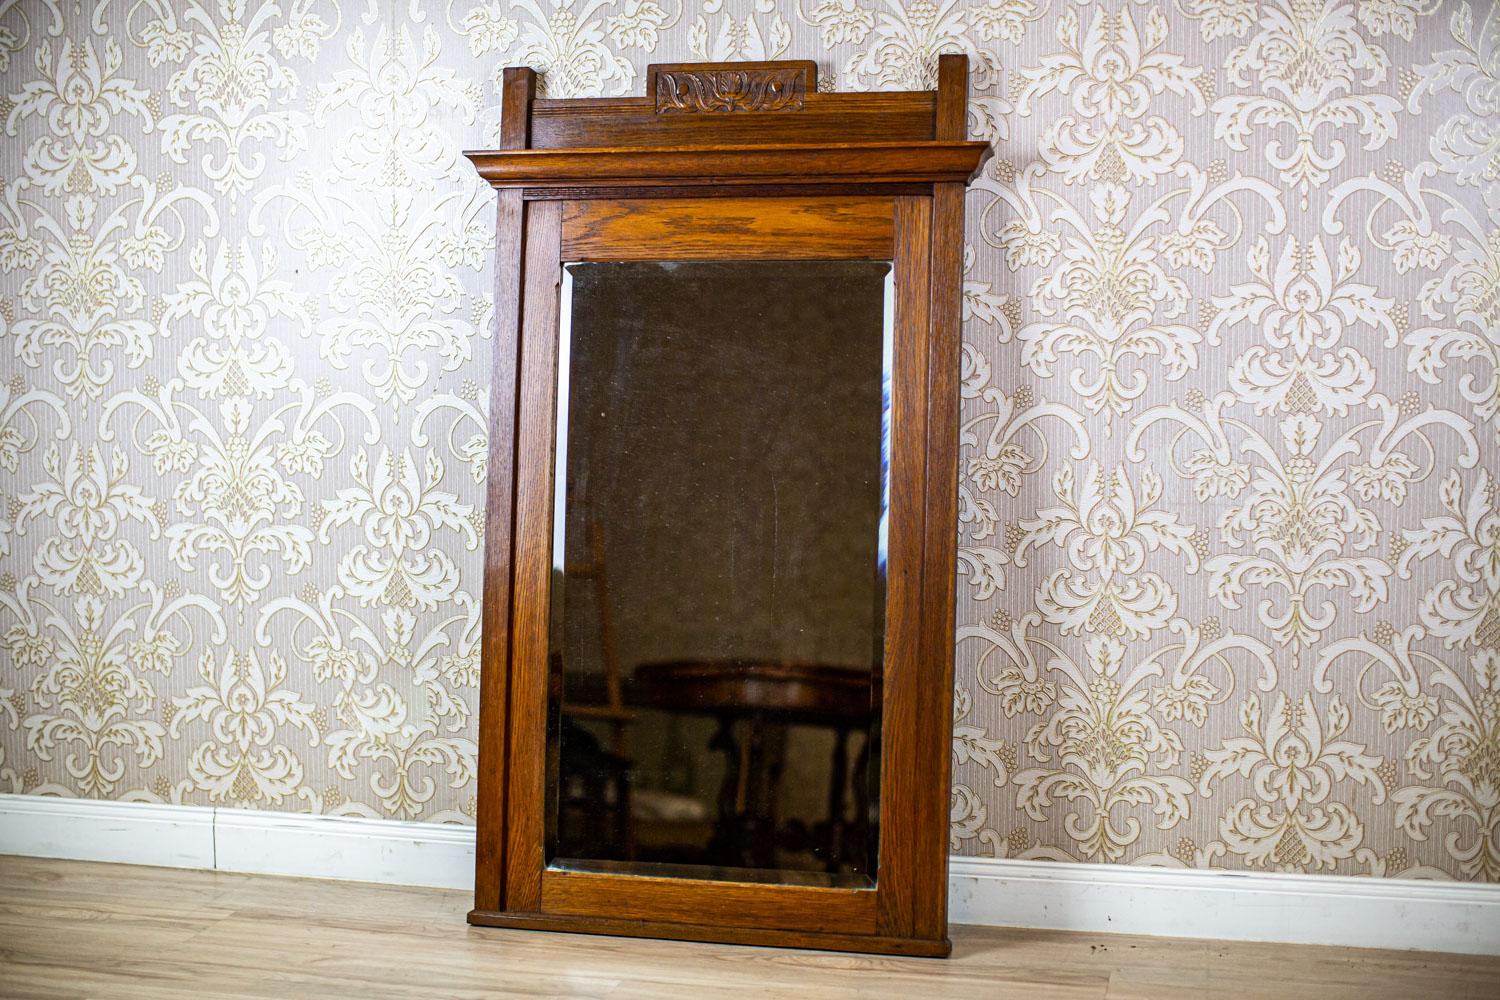 Early-20th Century Floor Mirror in Light Brown Oak Frame

We present you this tastefully decorated and simple in its form mirror in an oak frame.
It is dated the early 20th century.
The wood is in particularly good condition and refreshed with wax.